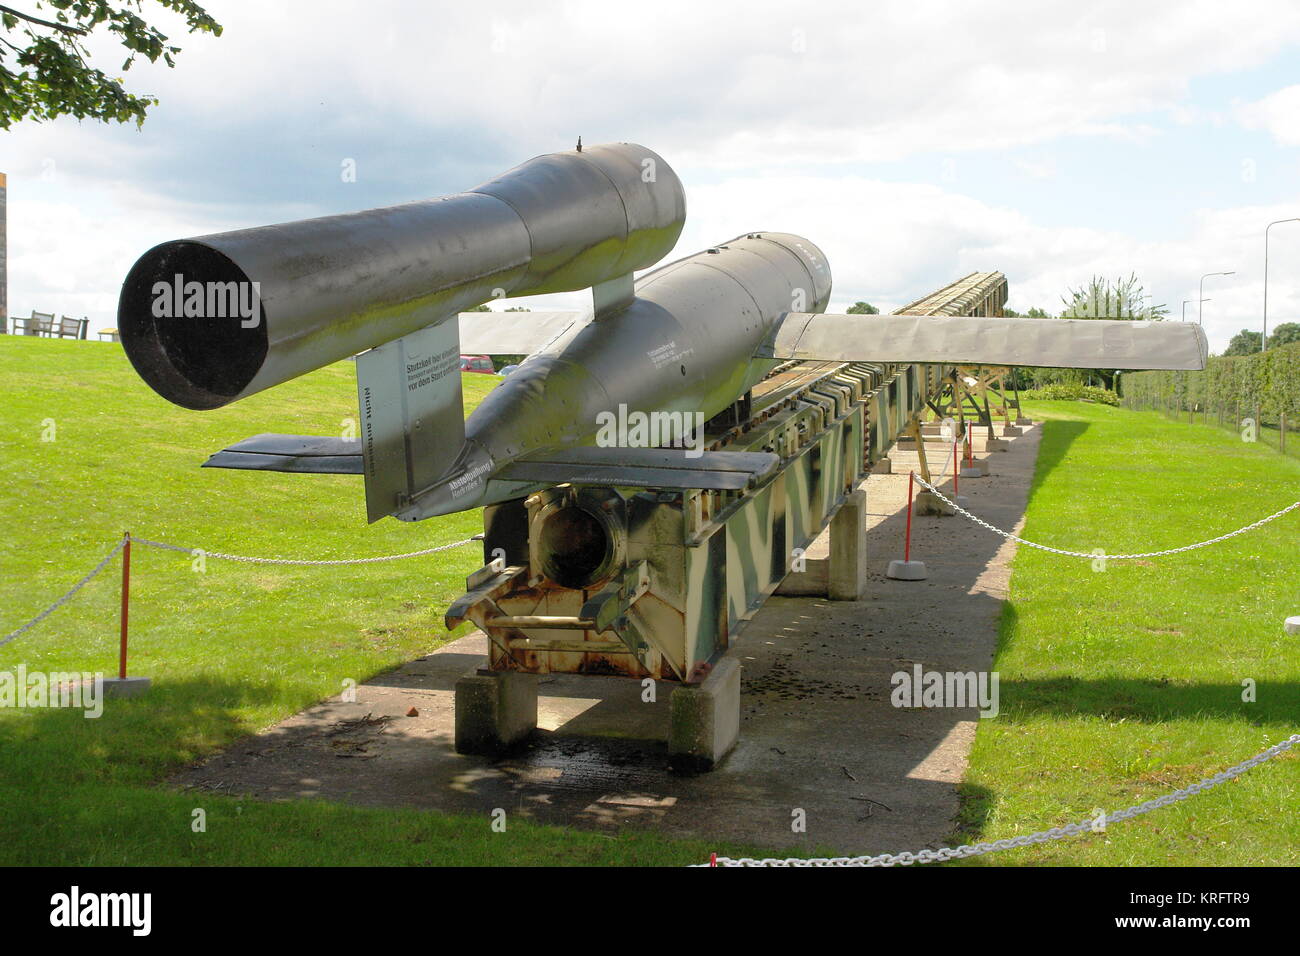 A V1 flying bomb (also known as a buzz bomb and a doodlebug) on